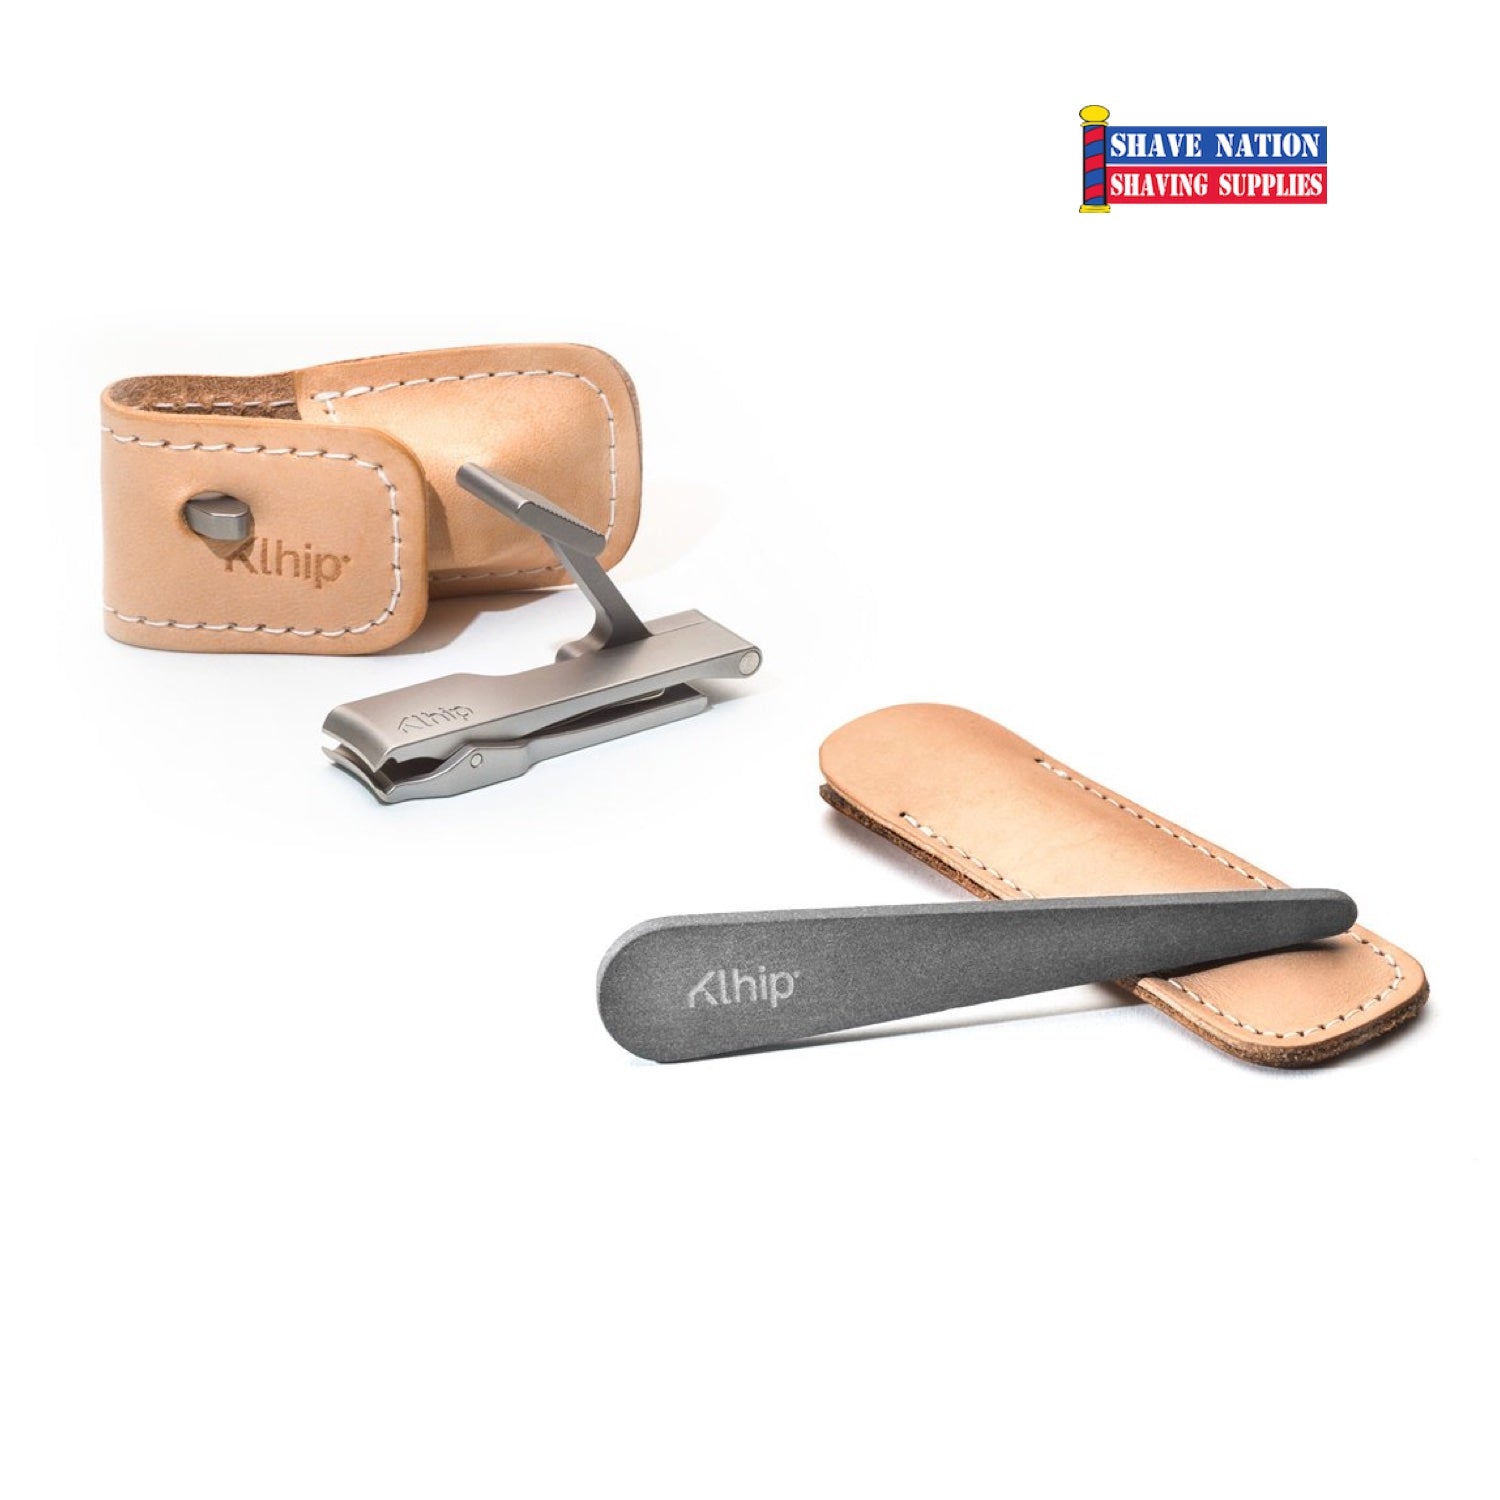 Klhip Ultimate Clipper and Stone Nail File